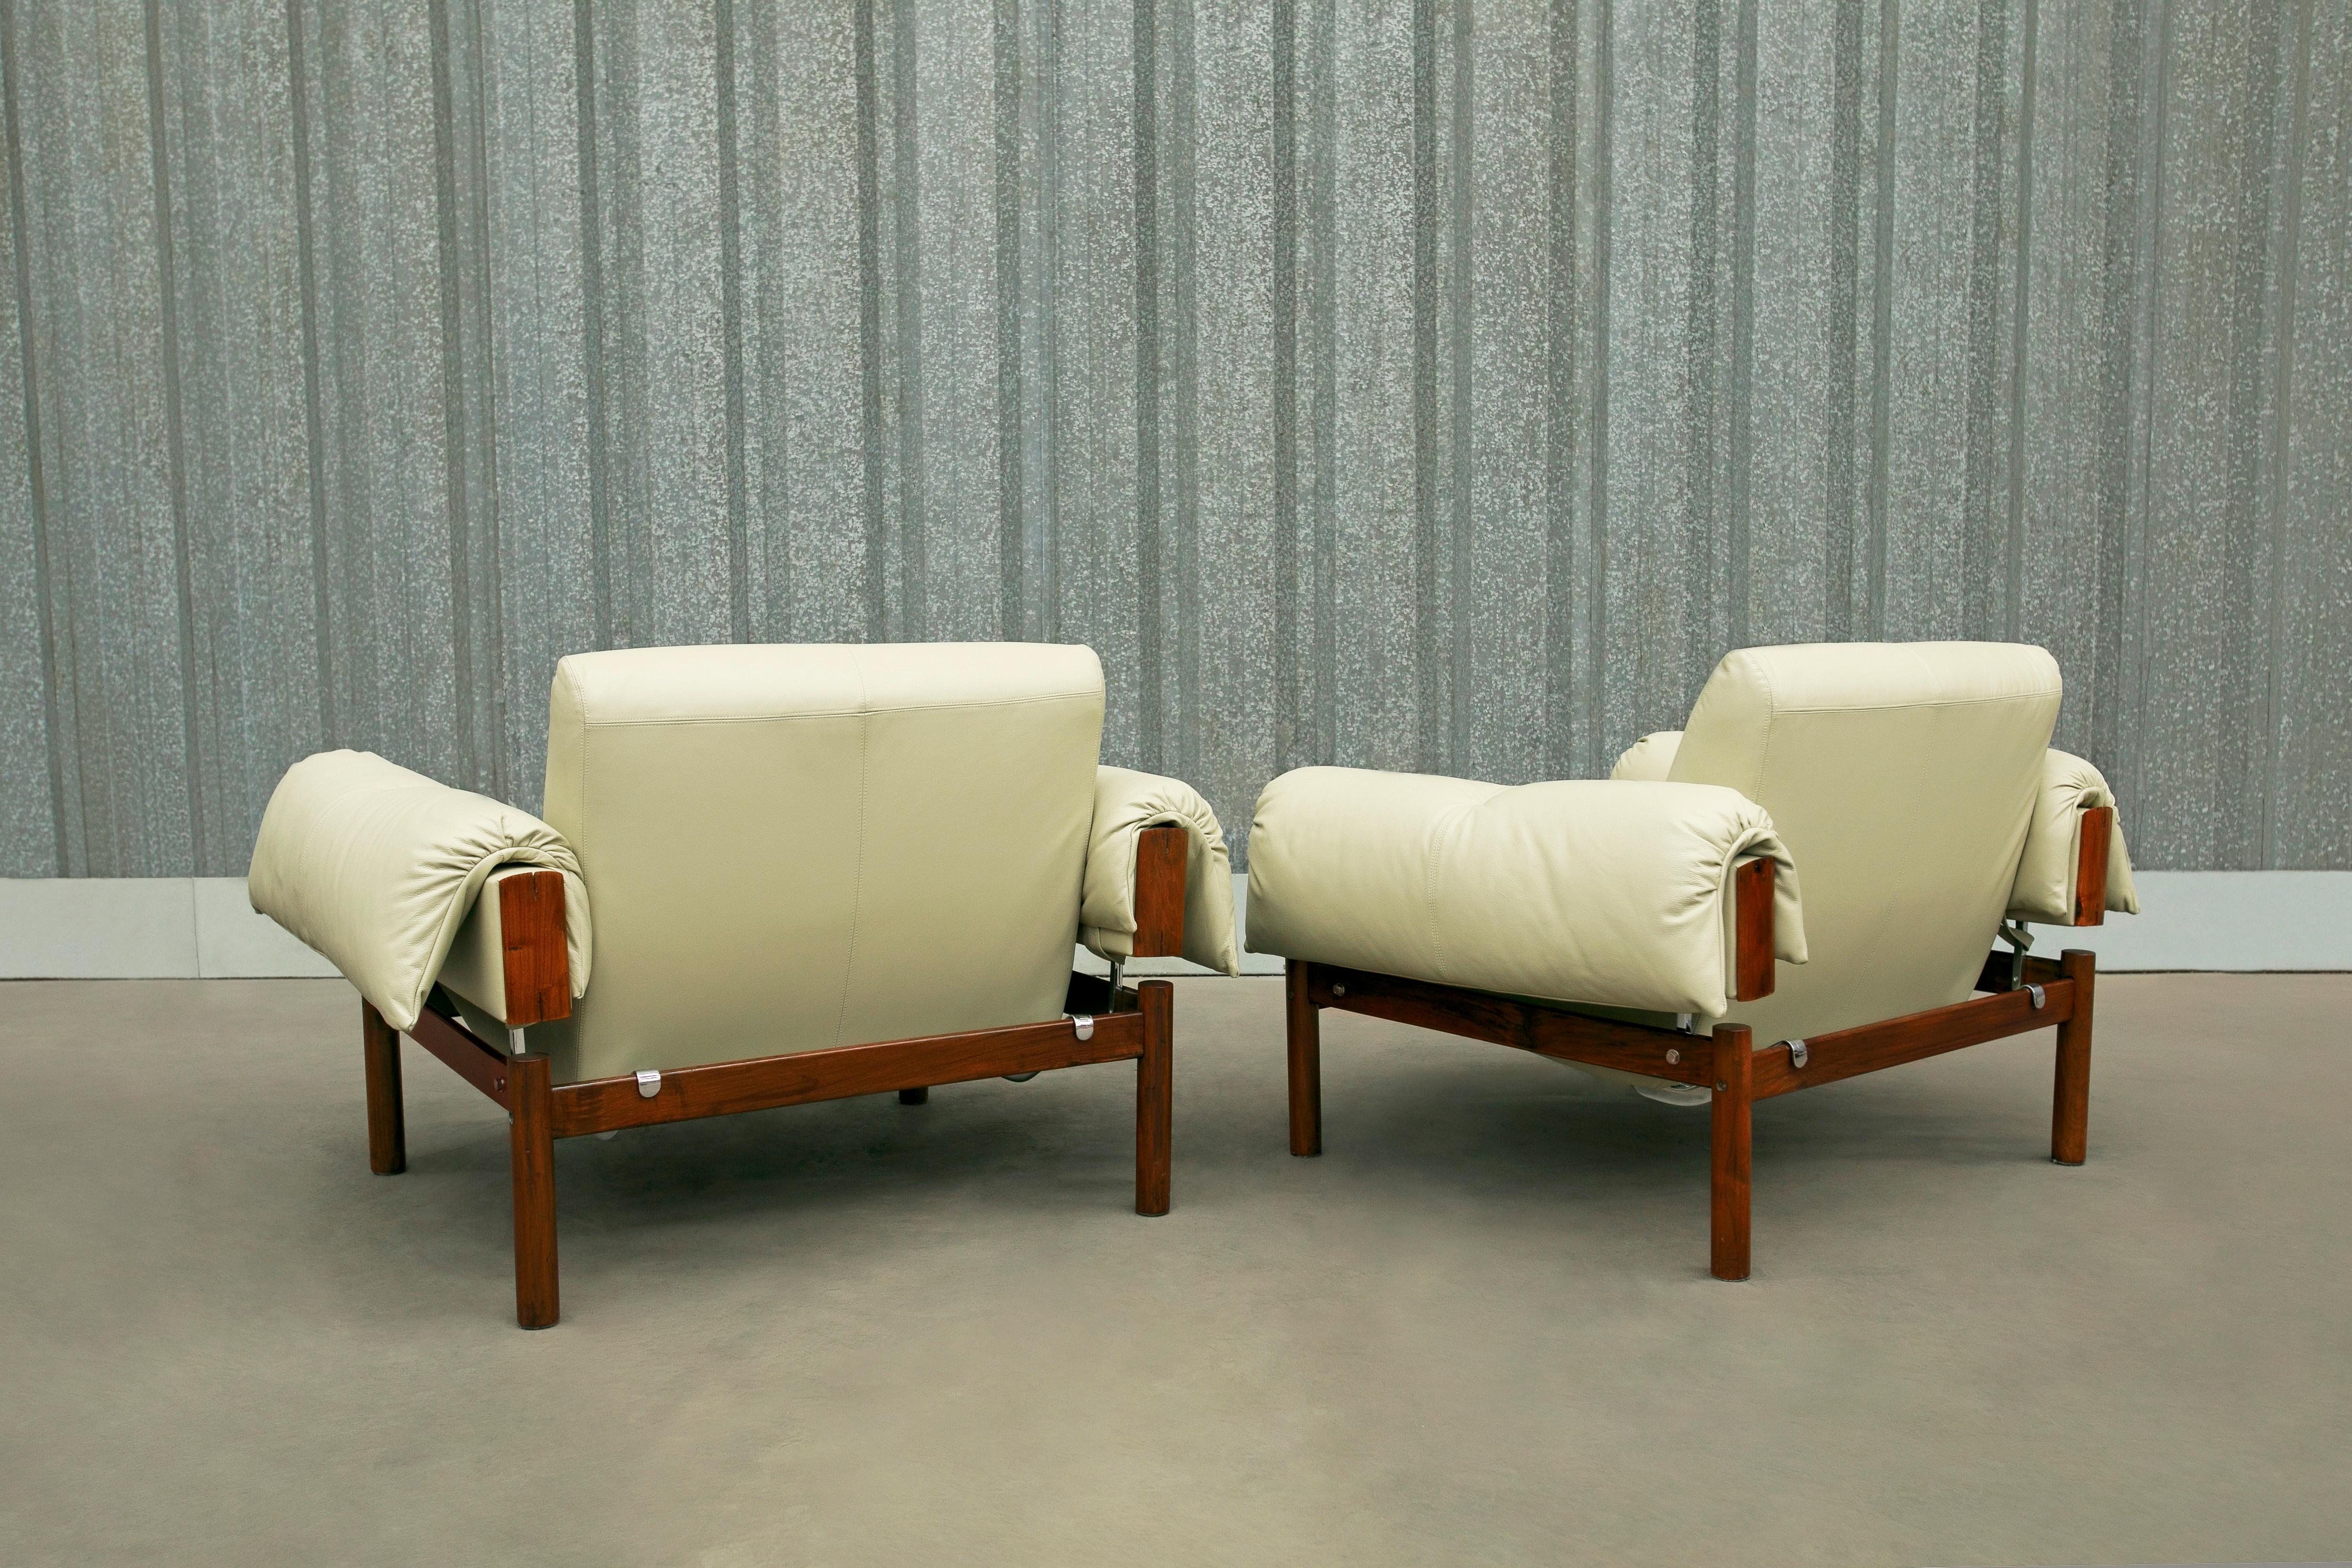 Brazilian Midcentury Armchairs MP-13 by Percival Lafer in Hardwood & Beige Leather, Brazil For Sale